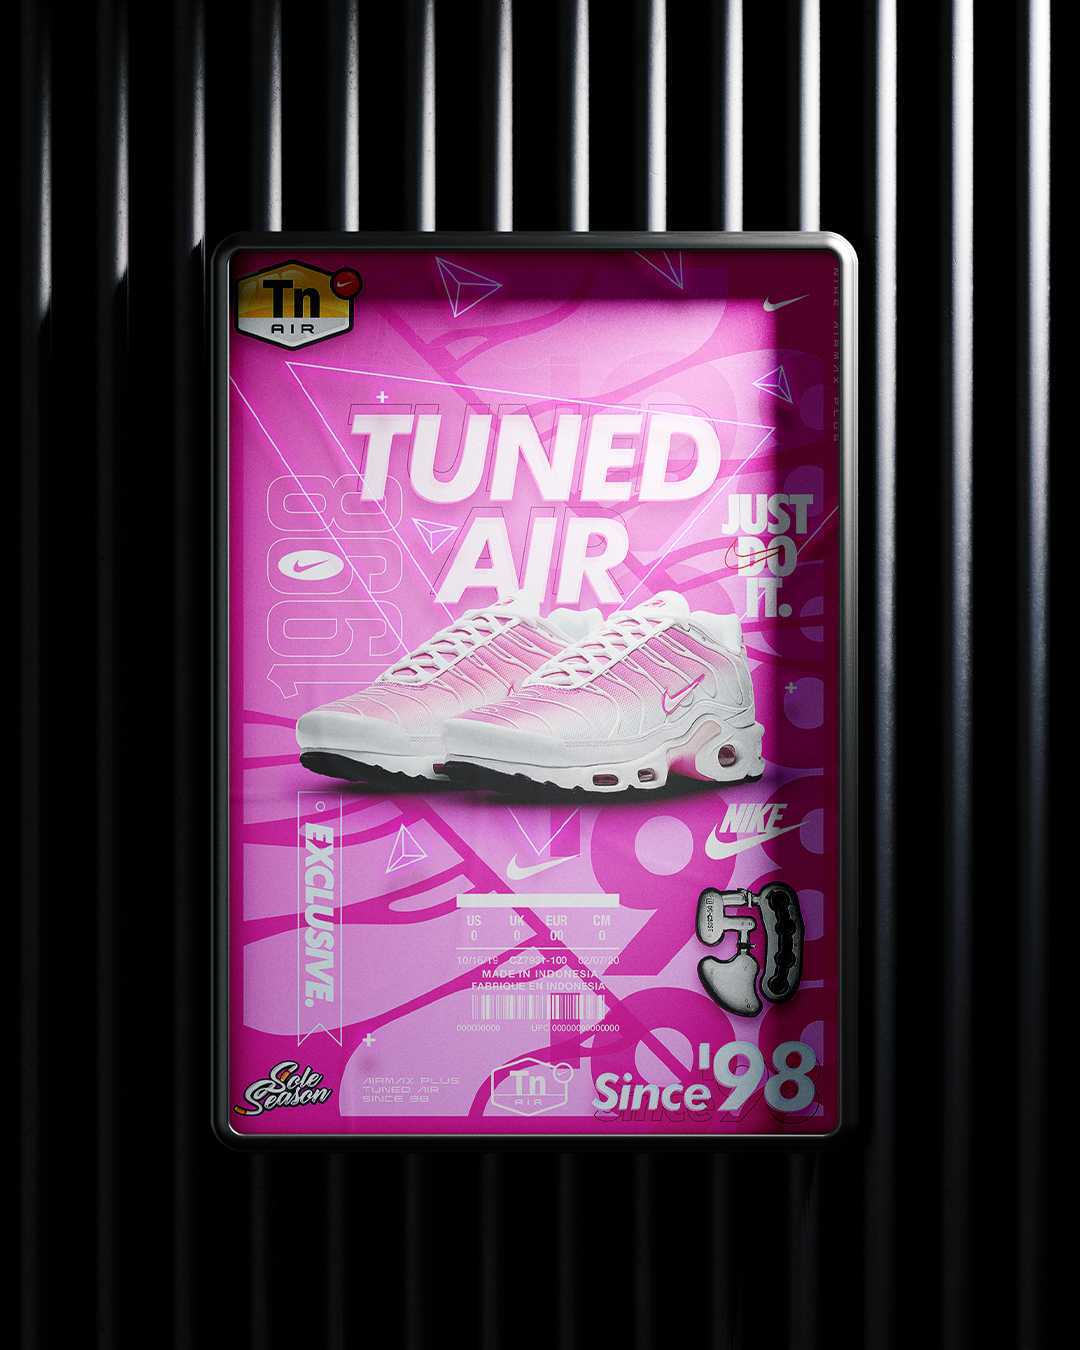 Nike Tn - Pink Fade 'Tuned Since '98' - A3 Poster